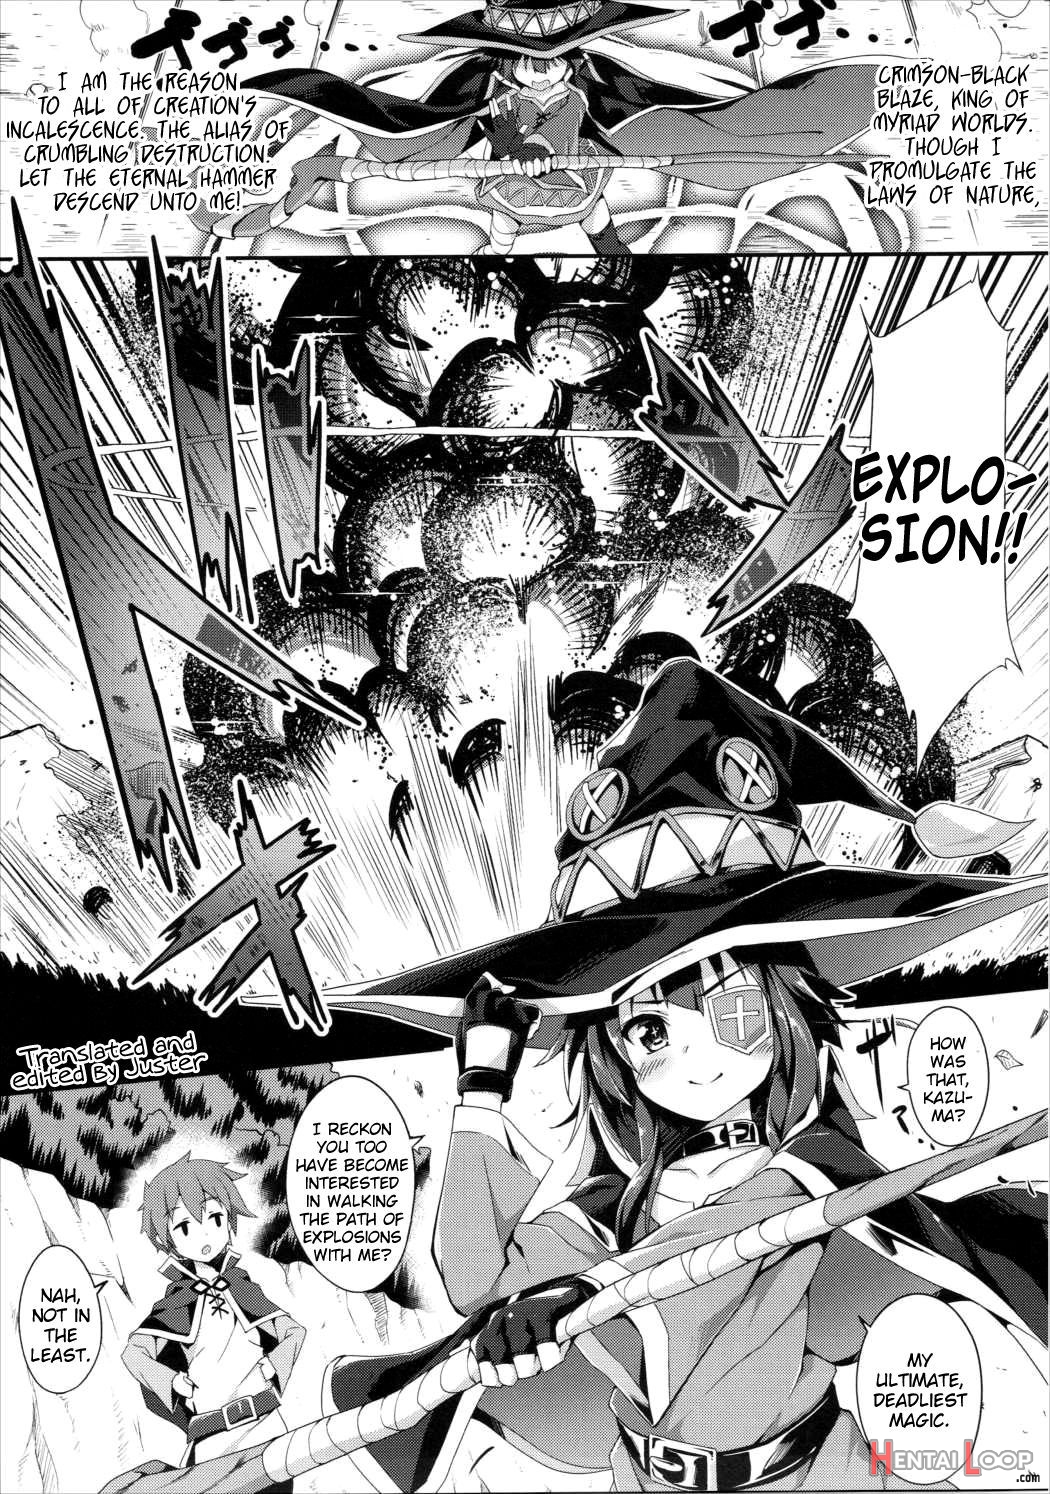 Megumin's Explosion Magic After page 4